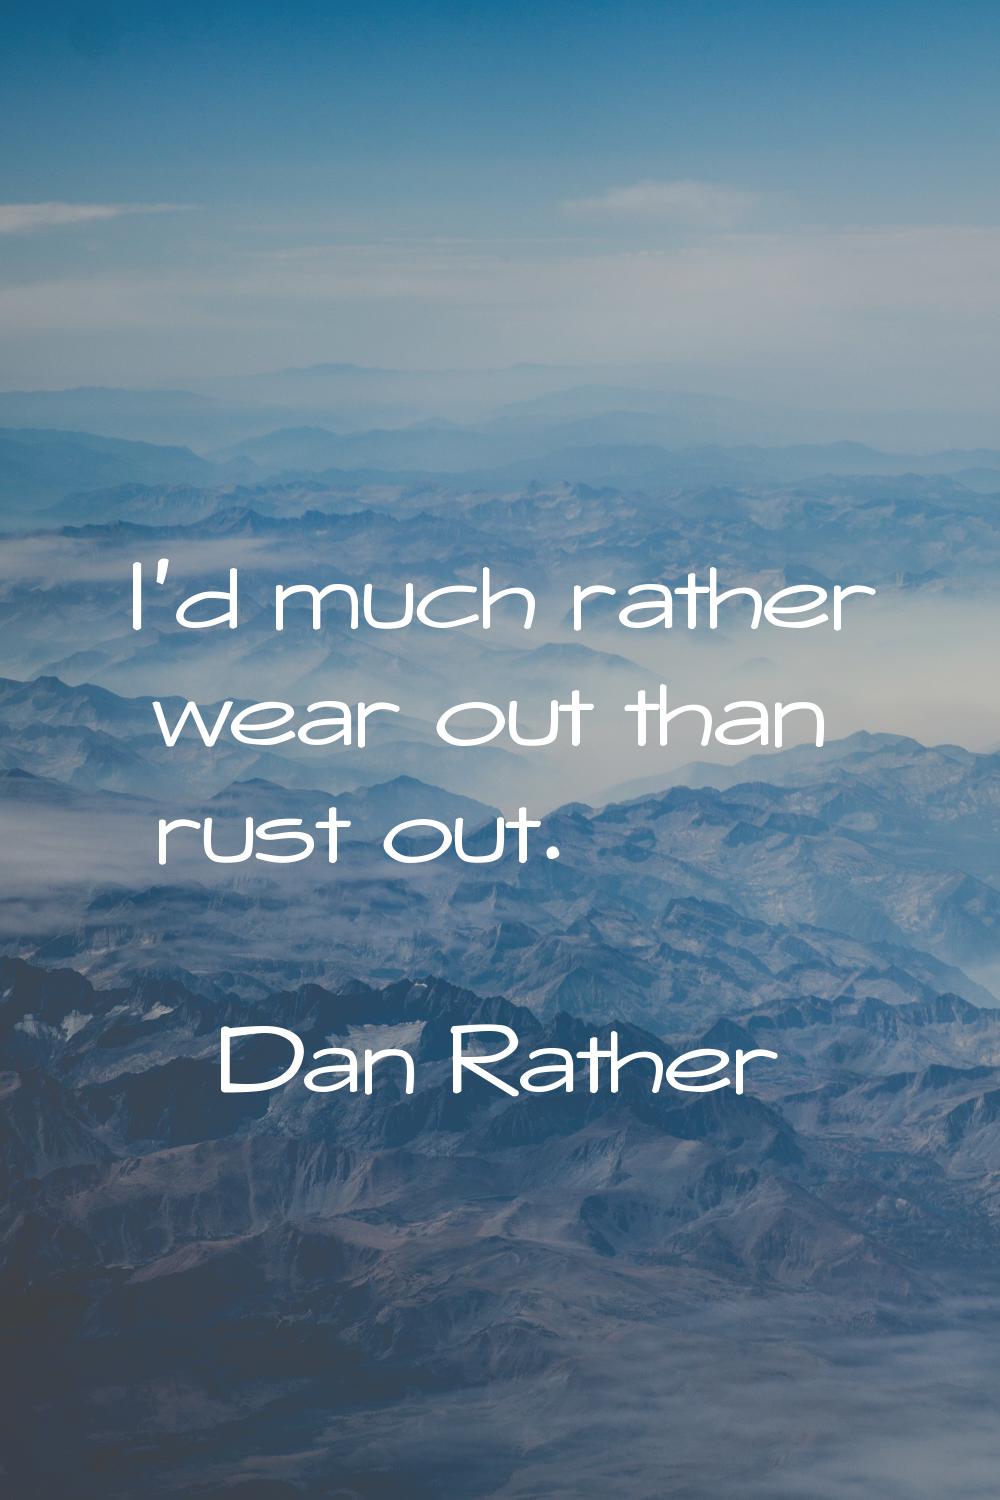 I'd much rather wear out than rust out.